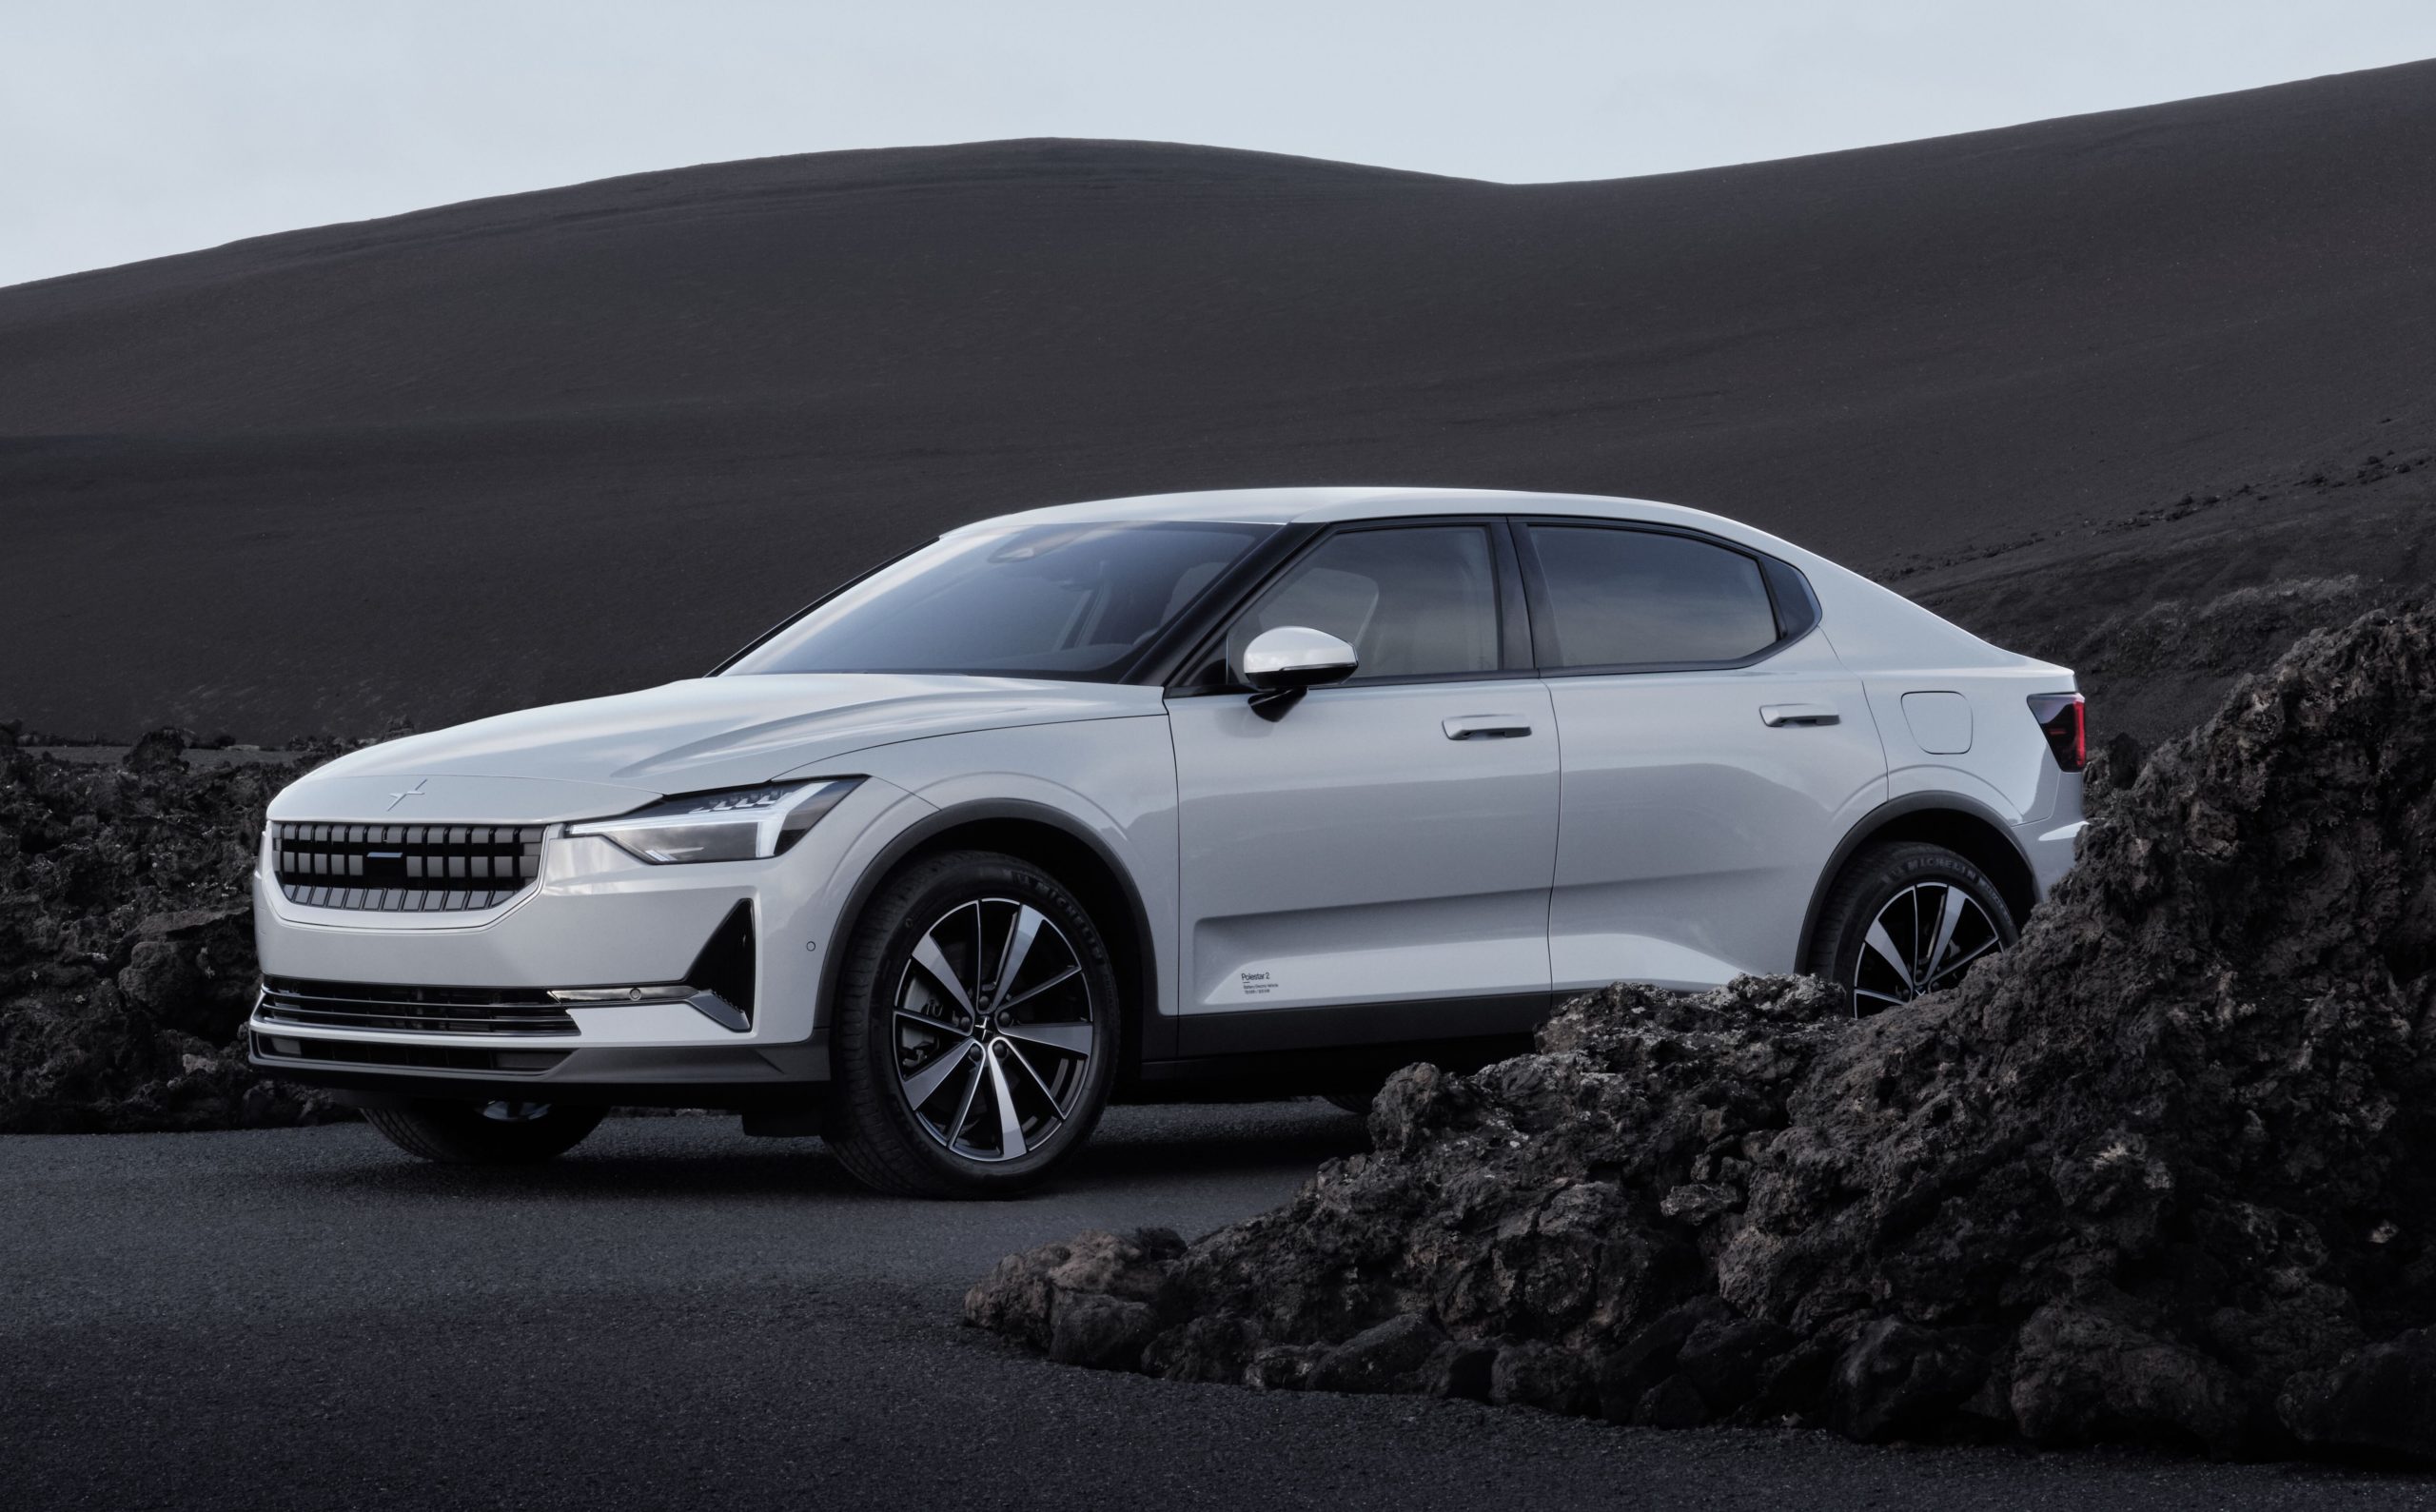 Polestar 2 Single Motor Electric Vehicle Now Available in United States